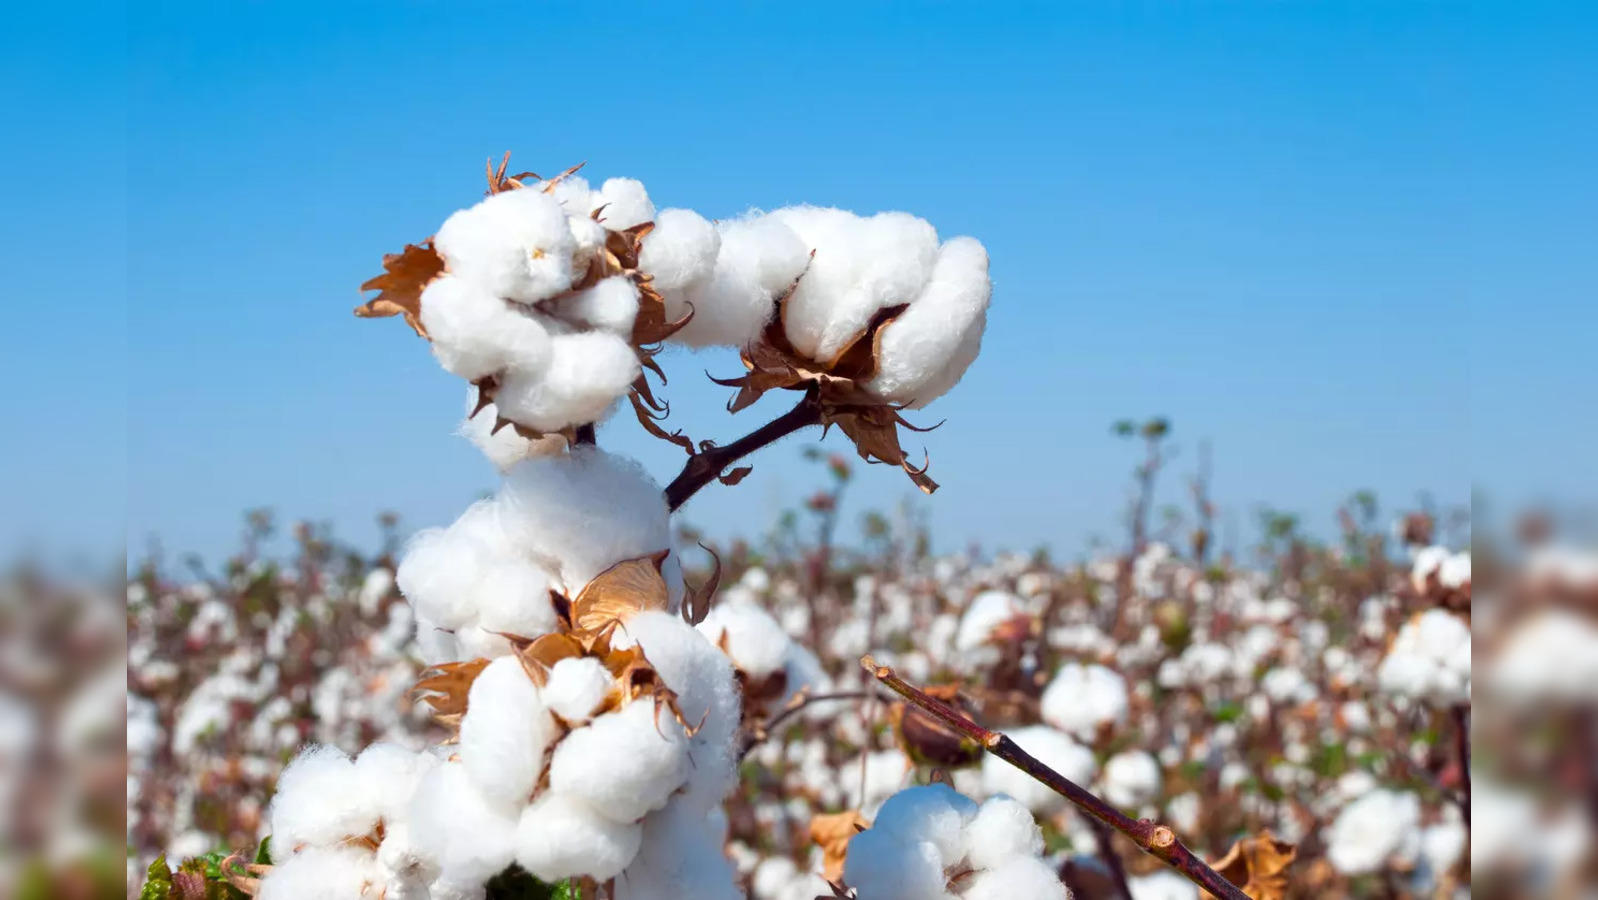 India cotton output seen rising 12% on bigger crop area, says